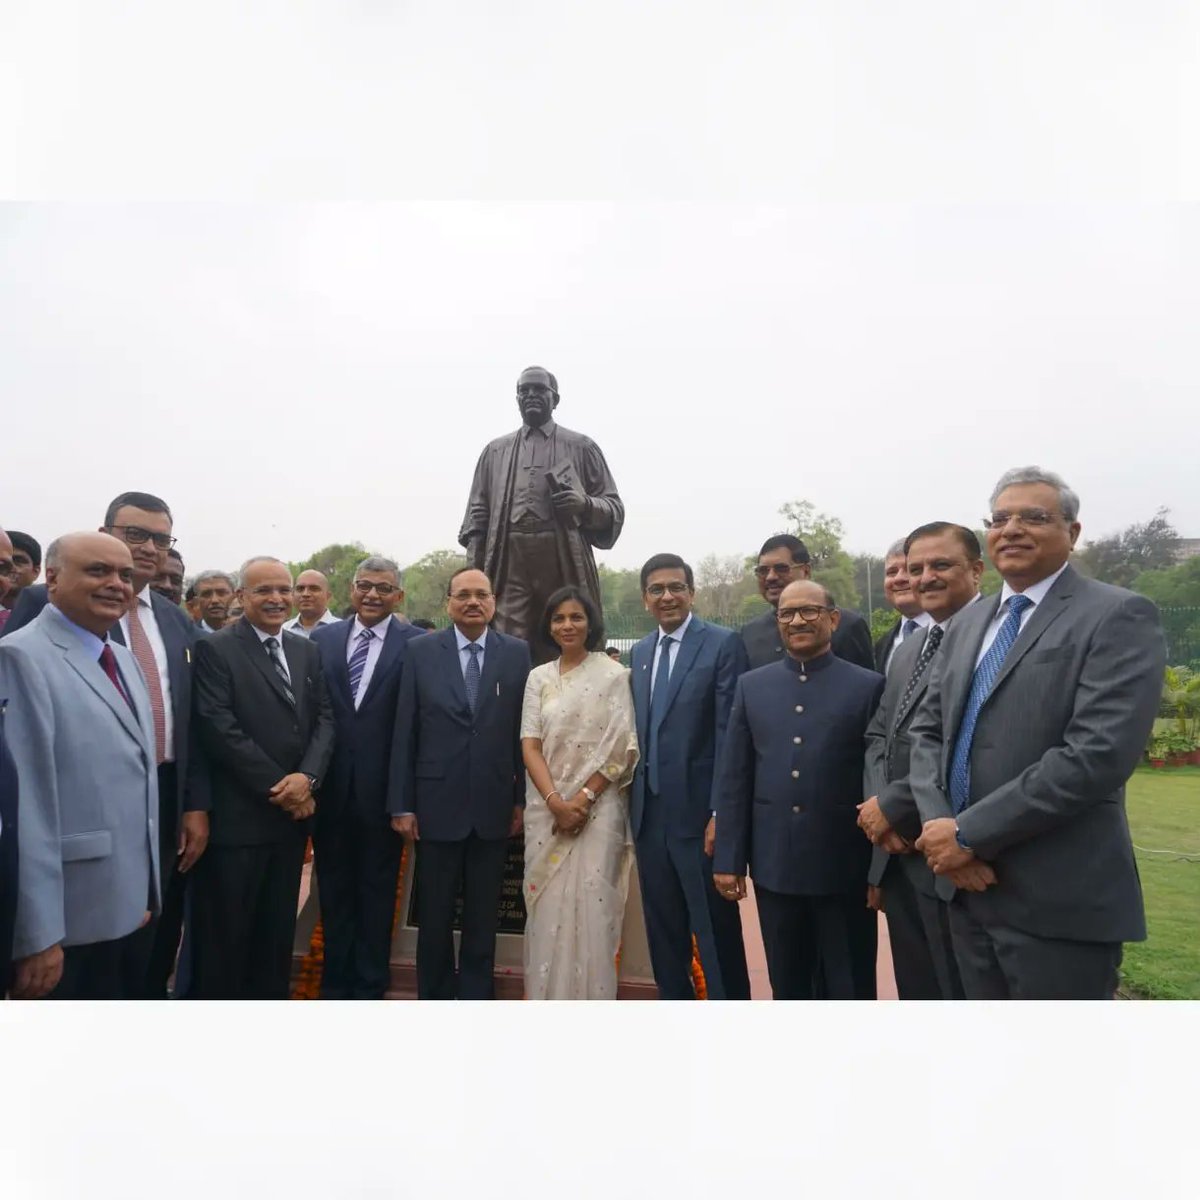 Chief Justice of India DY Chandrachud and other Judges of the Supreme Court of India pay respects to Dr. BR Ambedkar on Ambedkar Jayanti, 14 April 2024. #SupremeCourtofIndia #AmbedkarJayanti2024